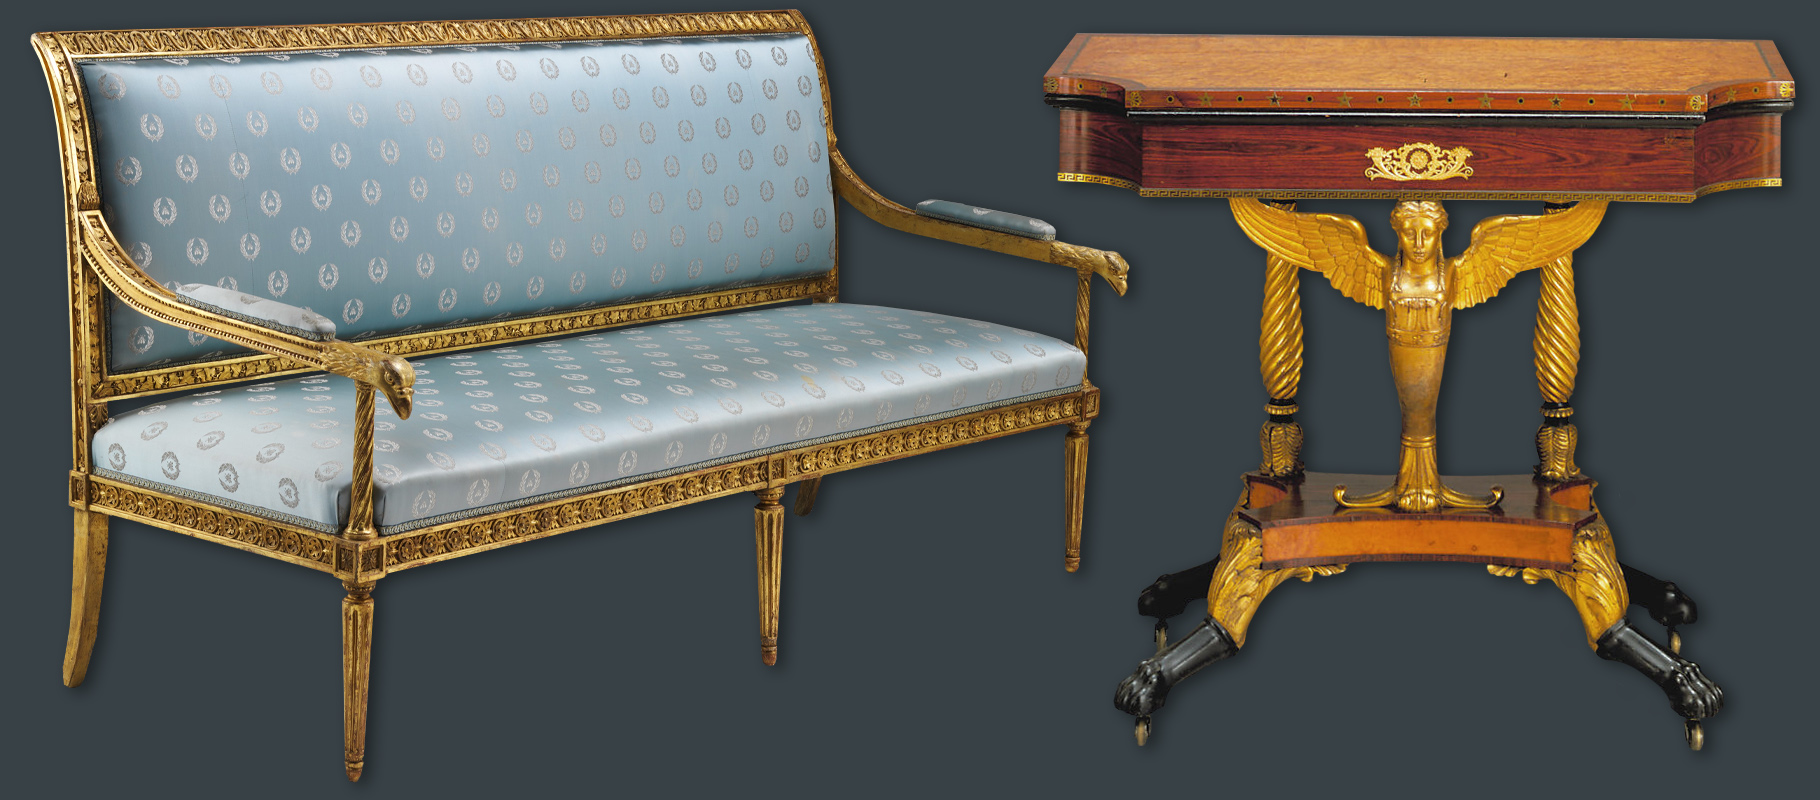 An Introduction to Louis XVI Style Furniture - French Country